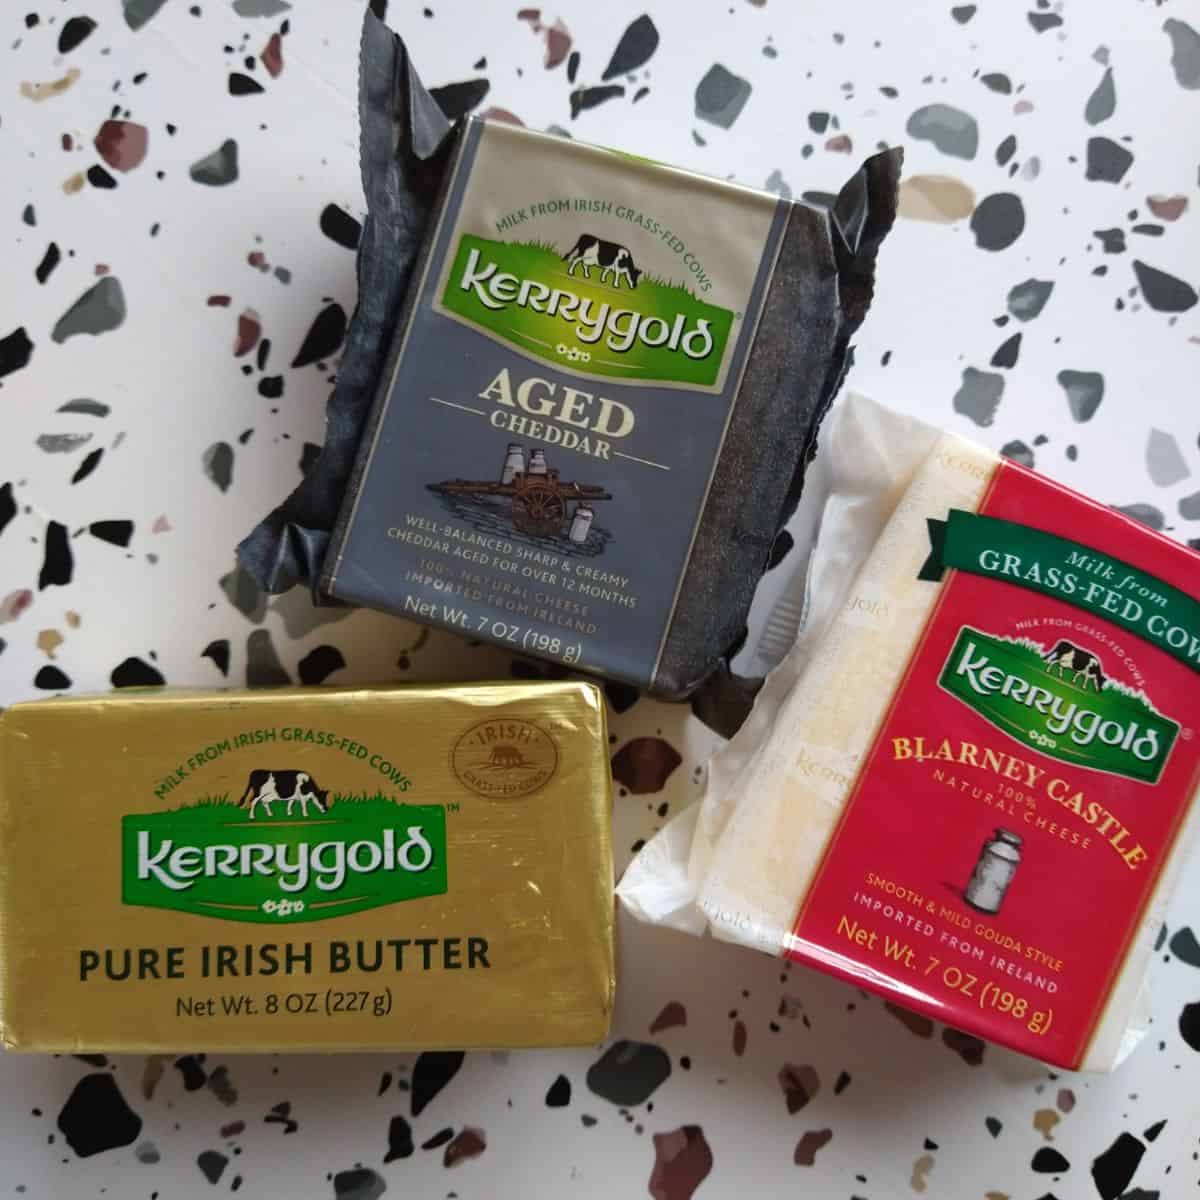 Kerrygold Products on a white table with gray and brown circles. The products are Irish butter, Aged Cheddar, and Blarney Castle cheese. 